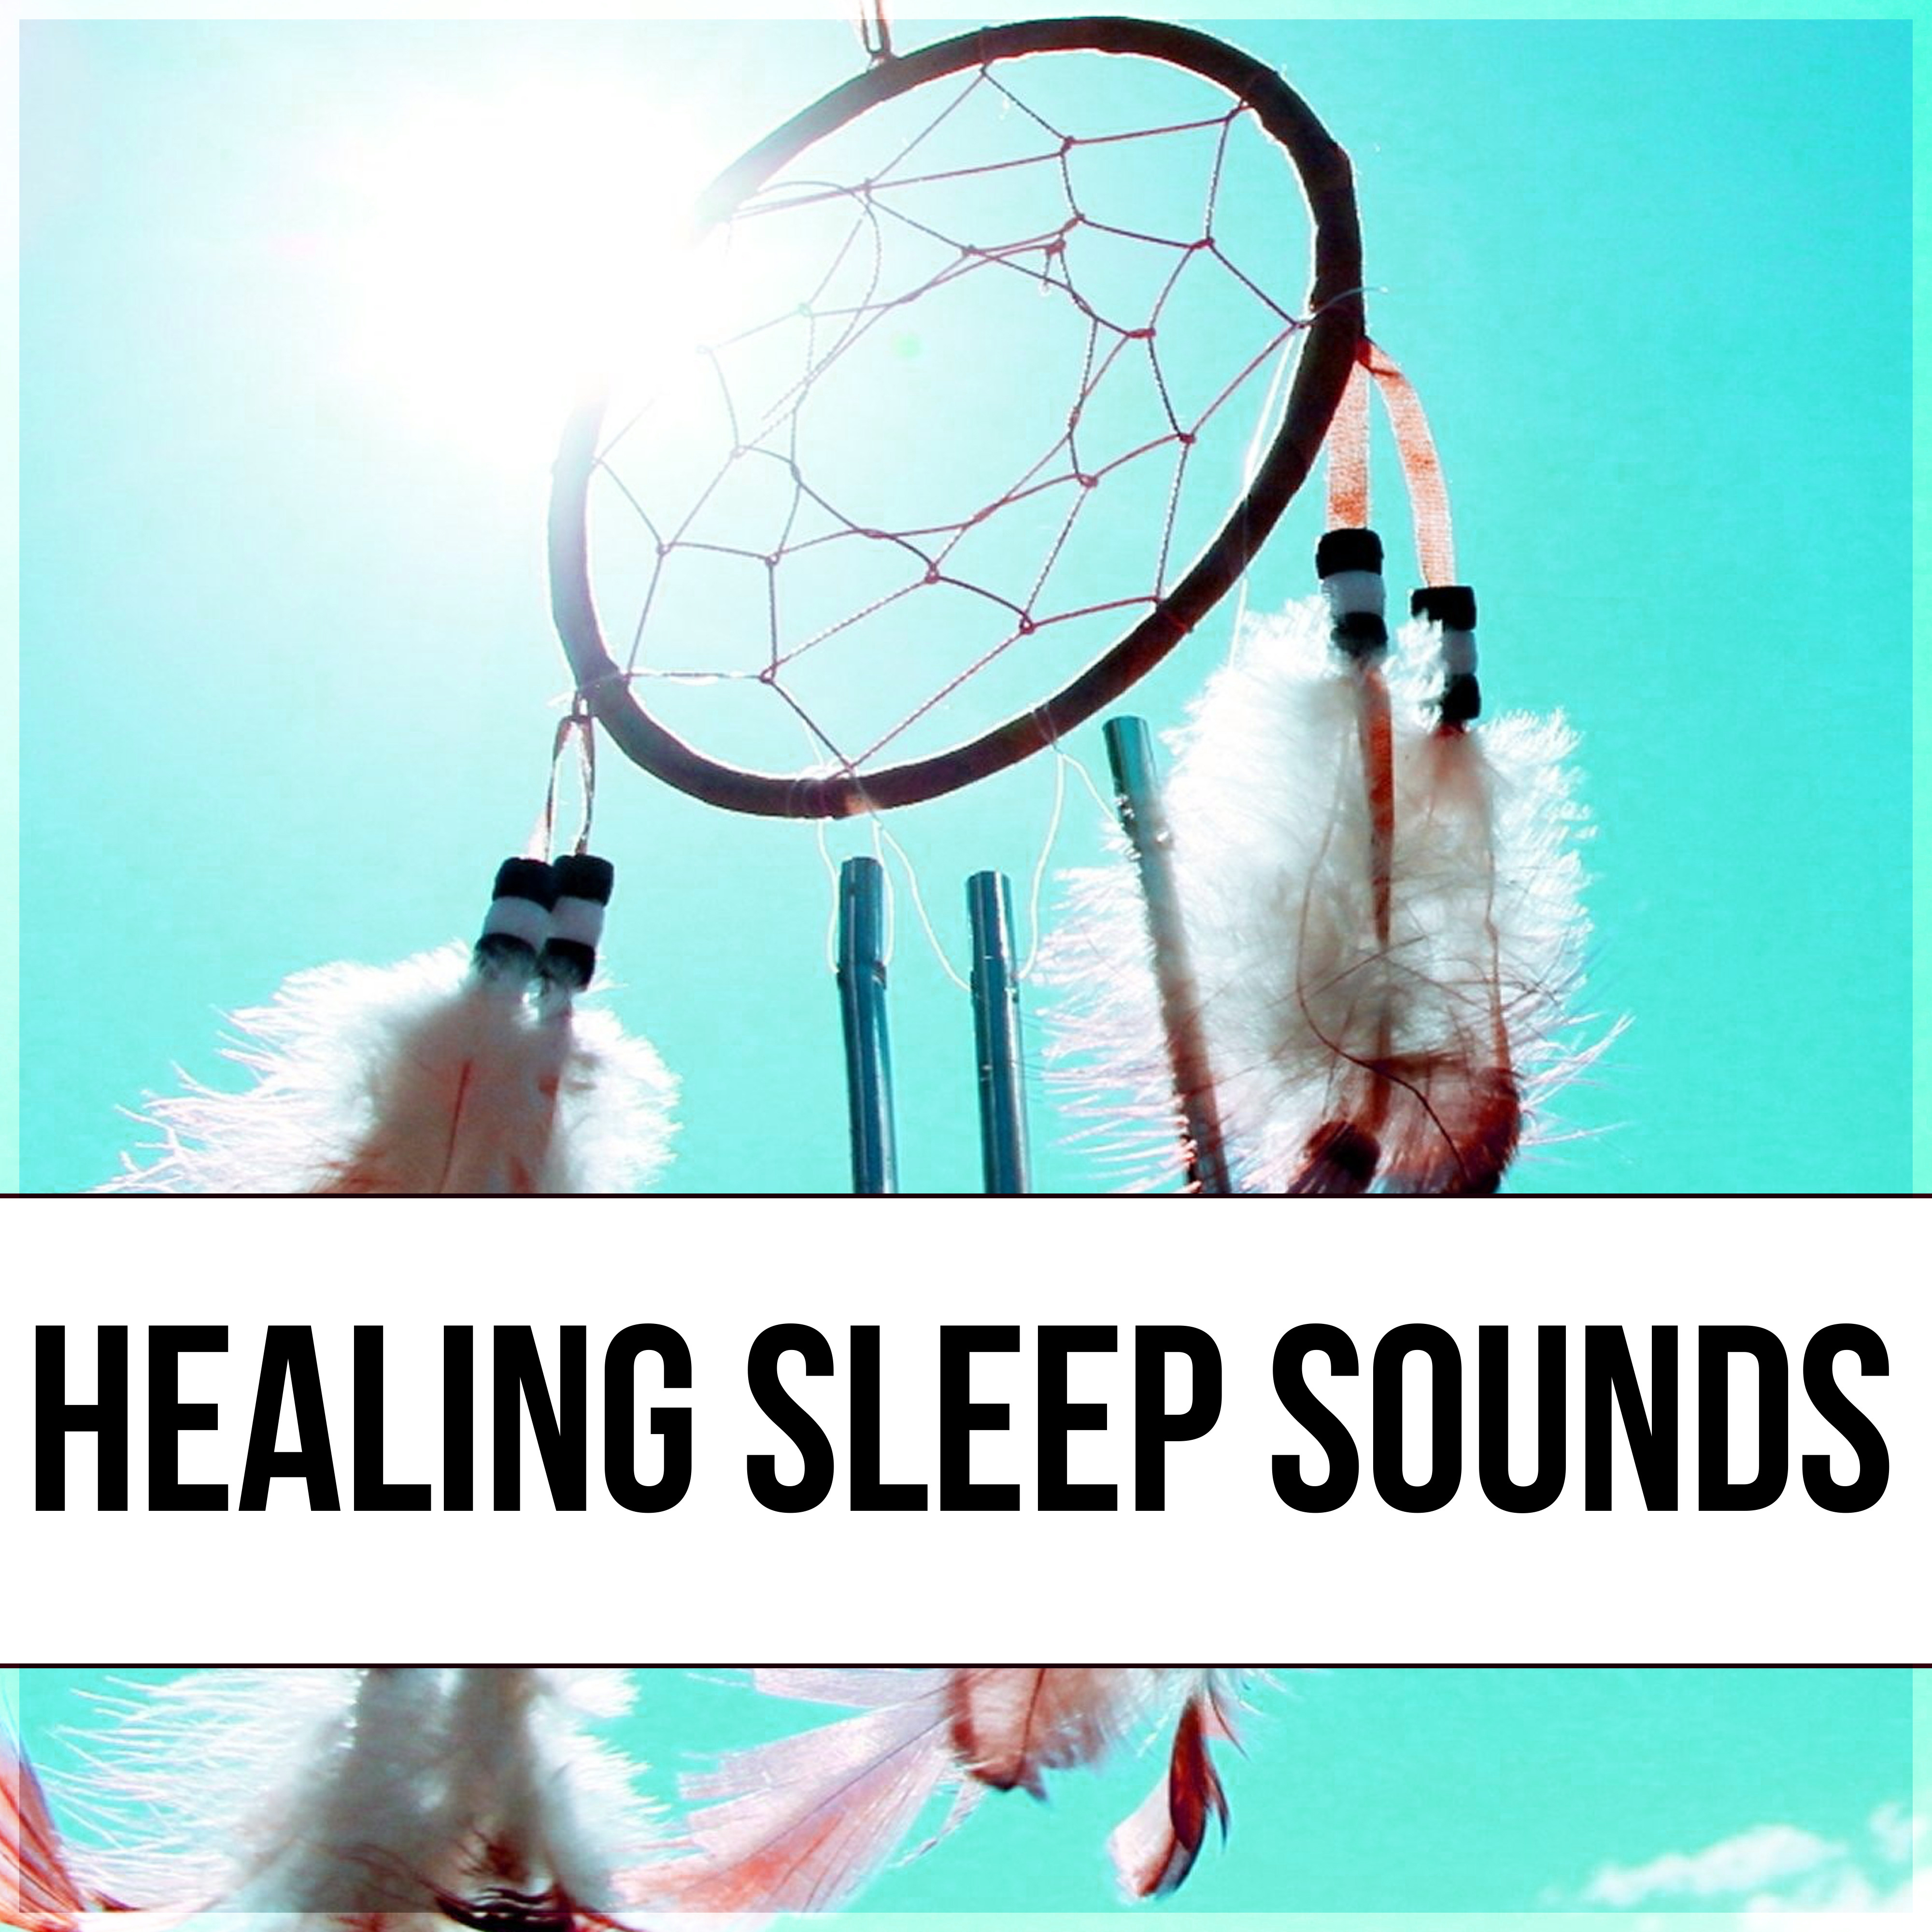 Healing Sleep Sounds - Serenity Lullabies with Relaxing Nature Sounds, Insomnia Therapy, Sleep Music to Help You Relax all Night, Background Music, Relaxing Massage